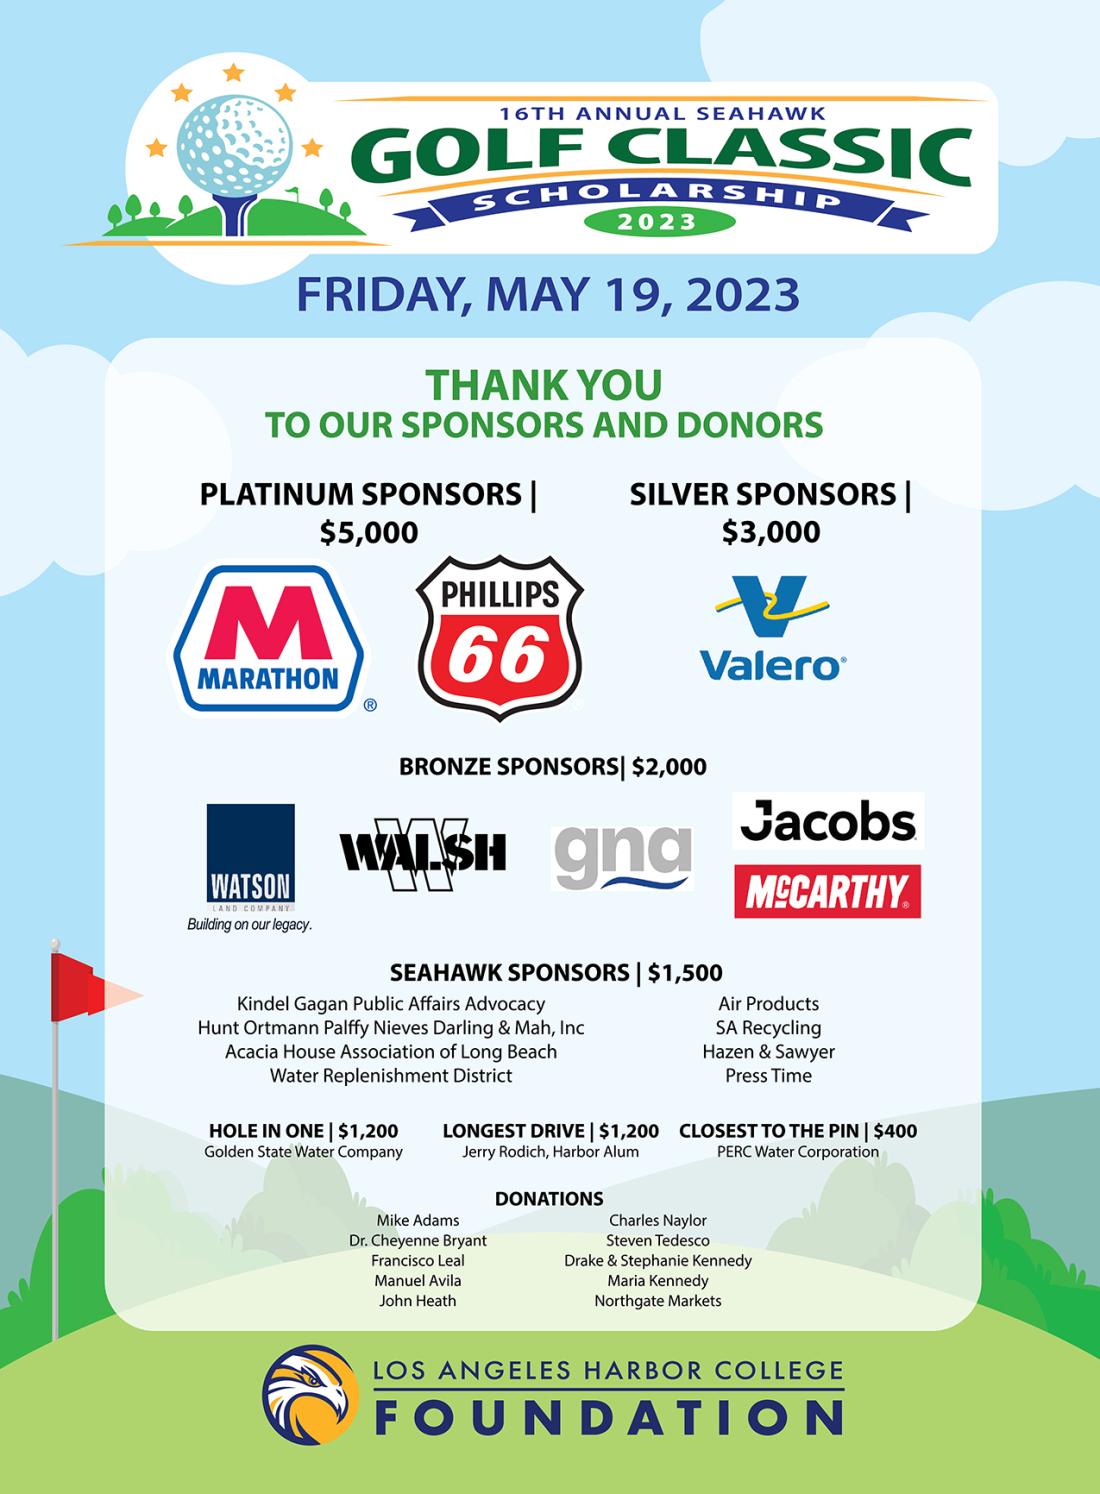 Thank you to the Golf Classic 2023 Sponsors